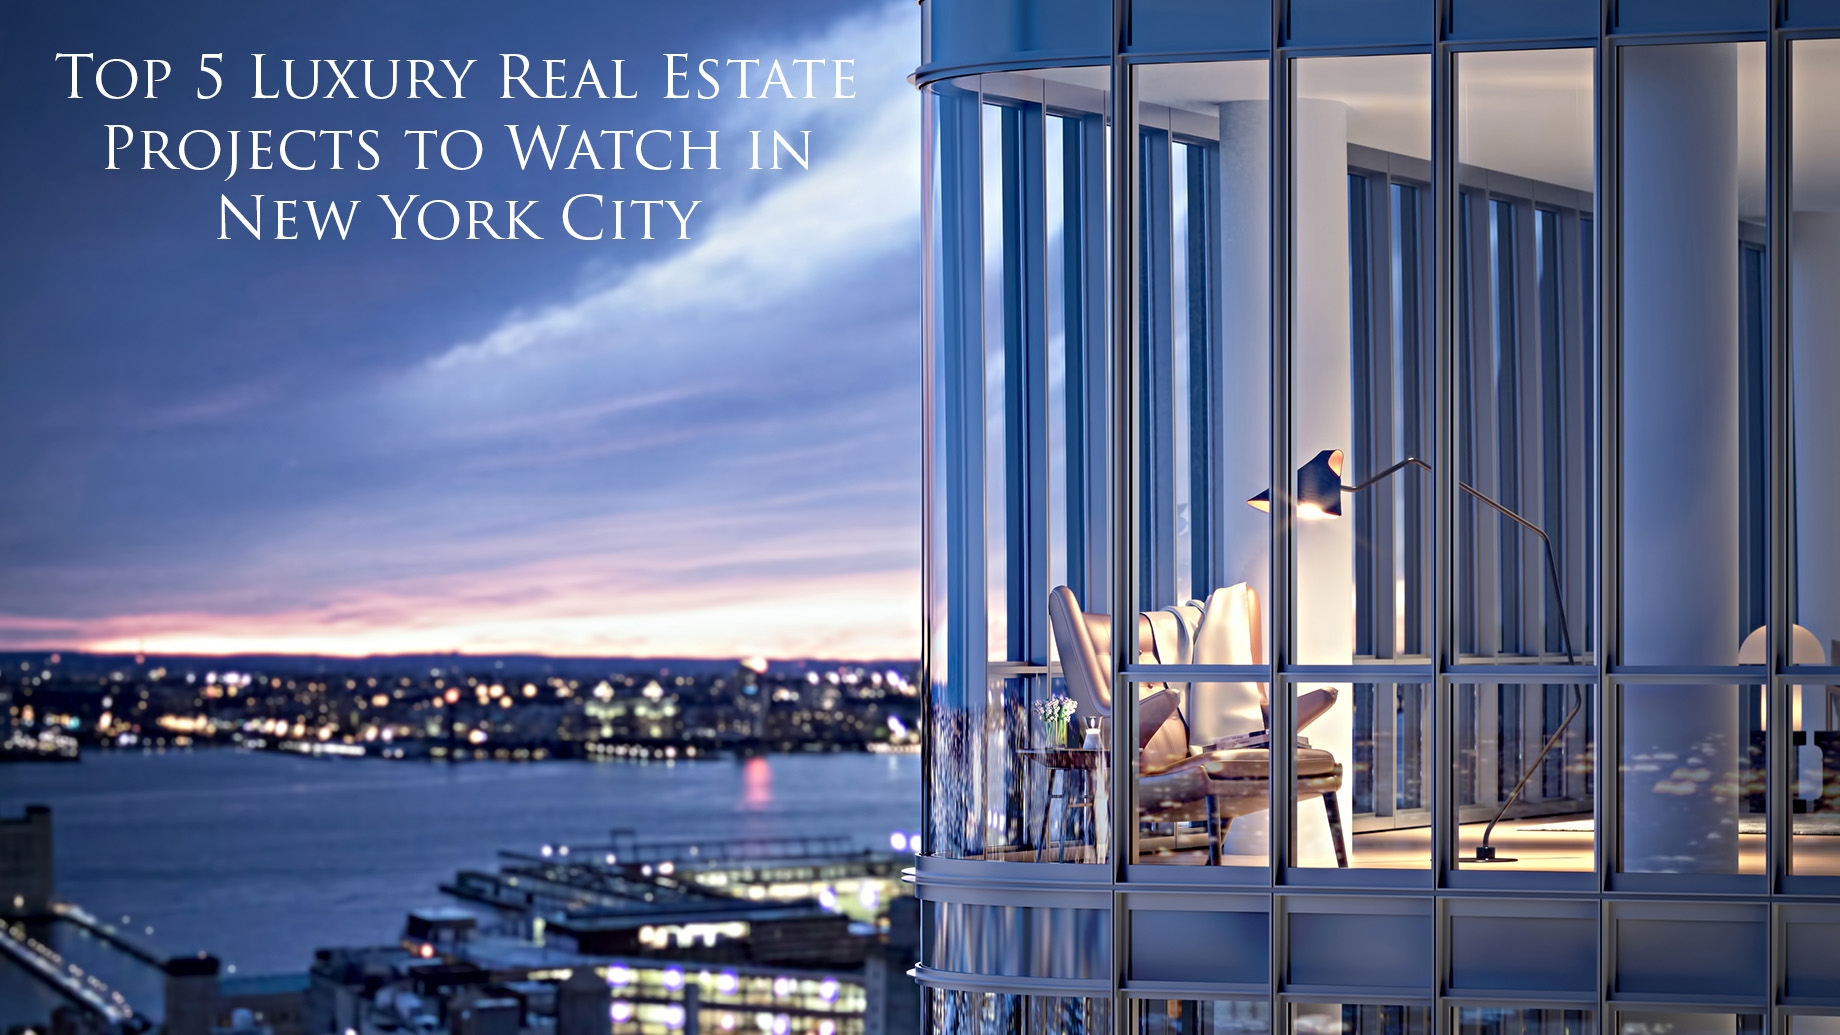 Top 5 Luxury Real Estate Projects to Watch in New York City